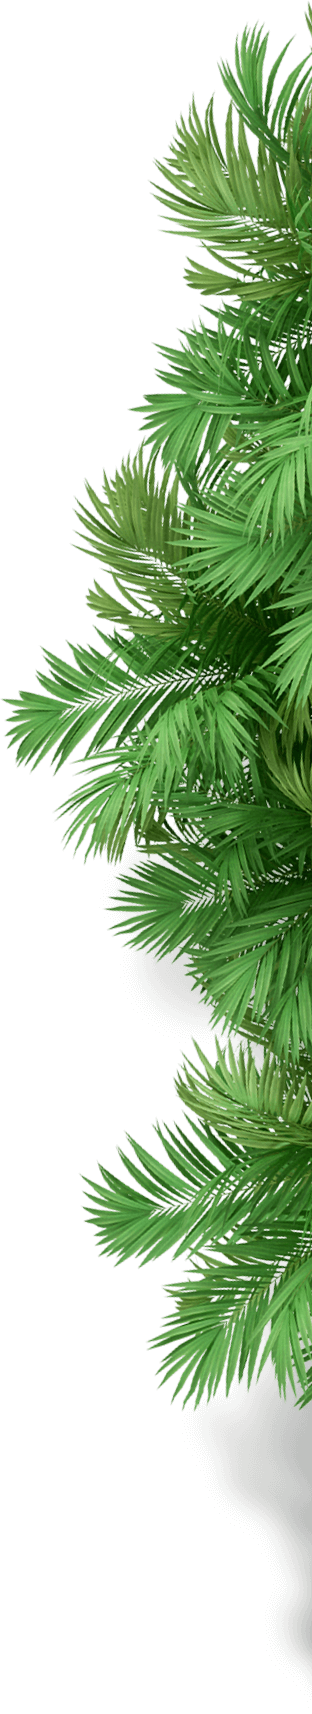 6053-palm-tree-1.png